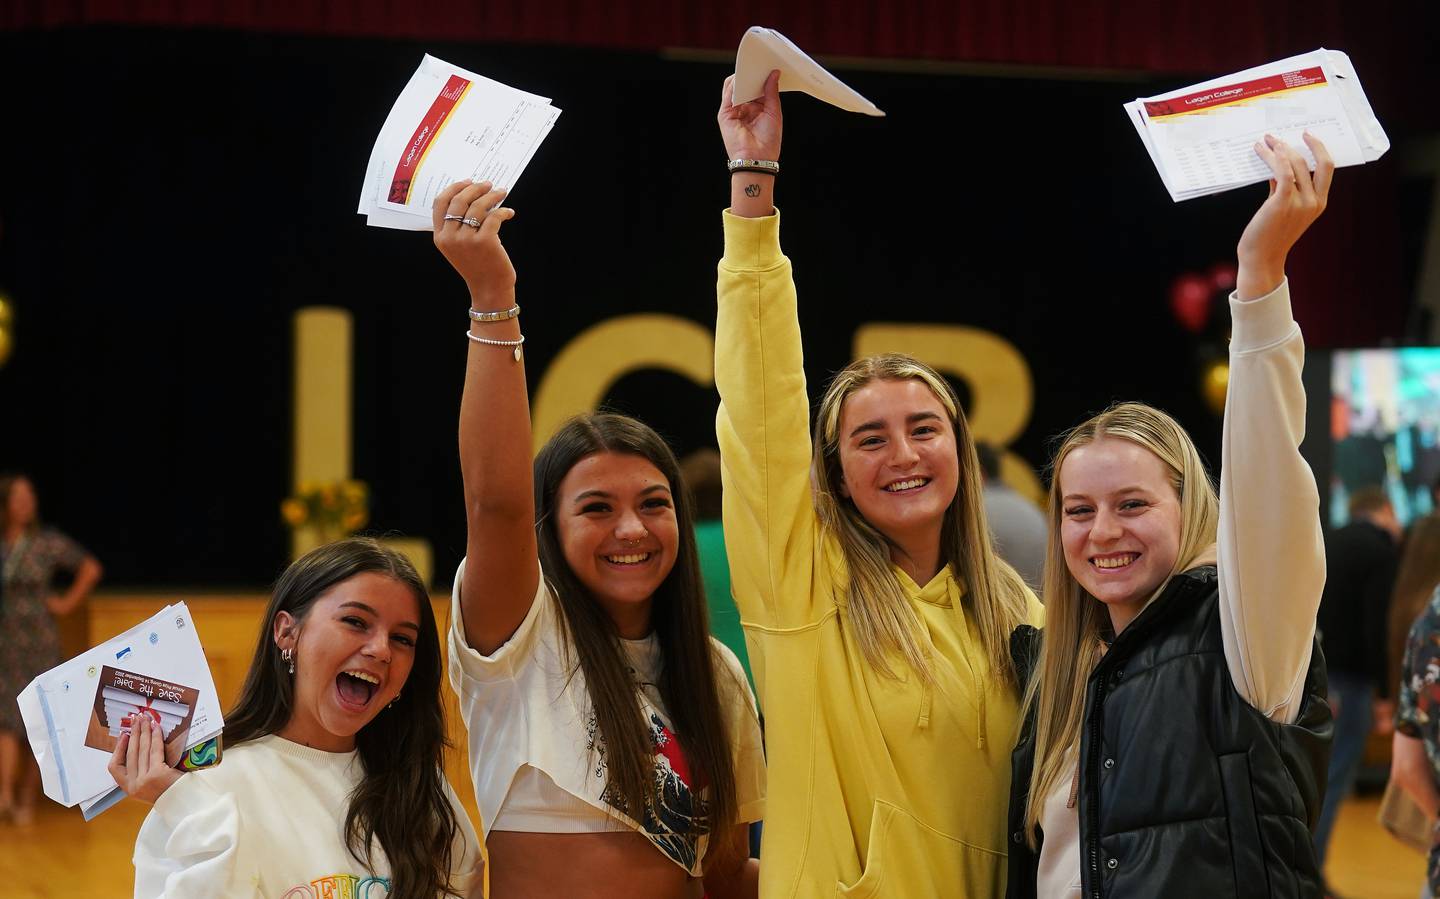 Friends (from left) Katie McCrory, Atlanta Watson, Laura Sharp and Nicole Babb are all smiles after opening their A-level results at Lagan College, Belfast. PA
